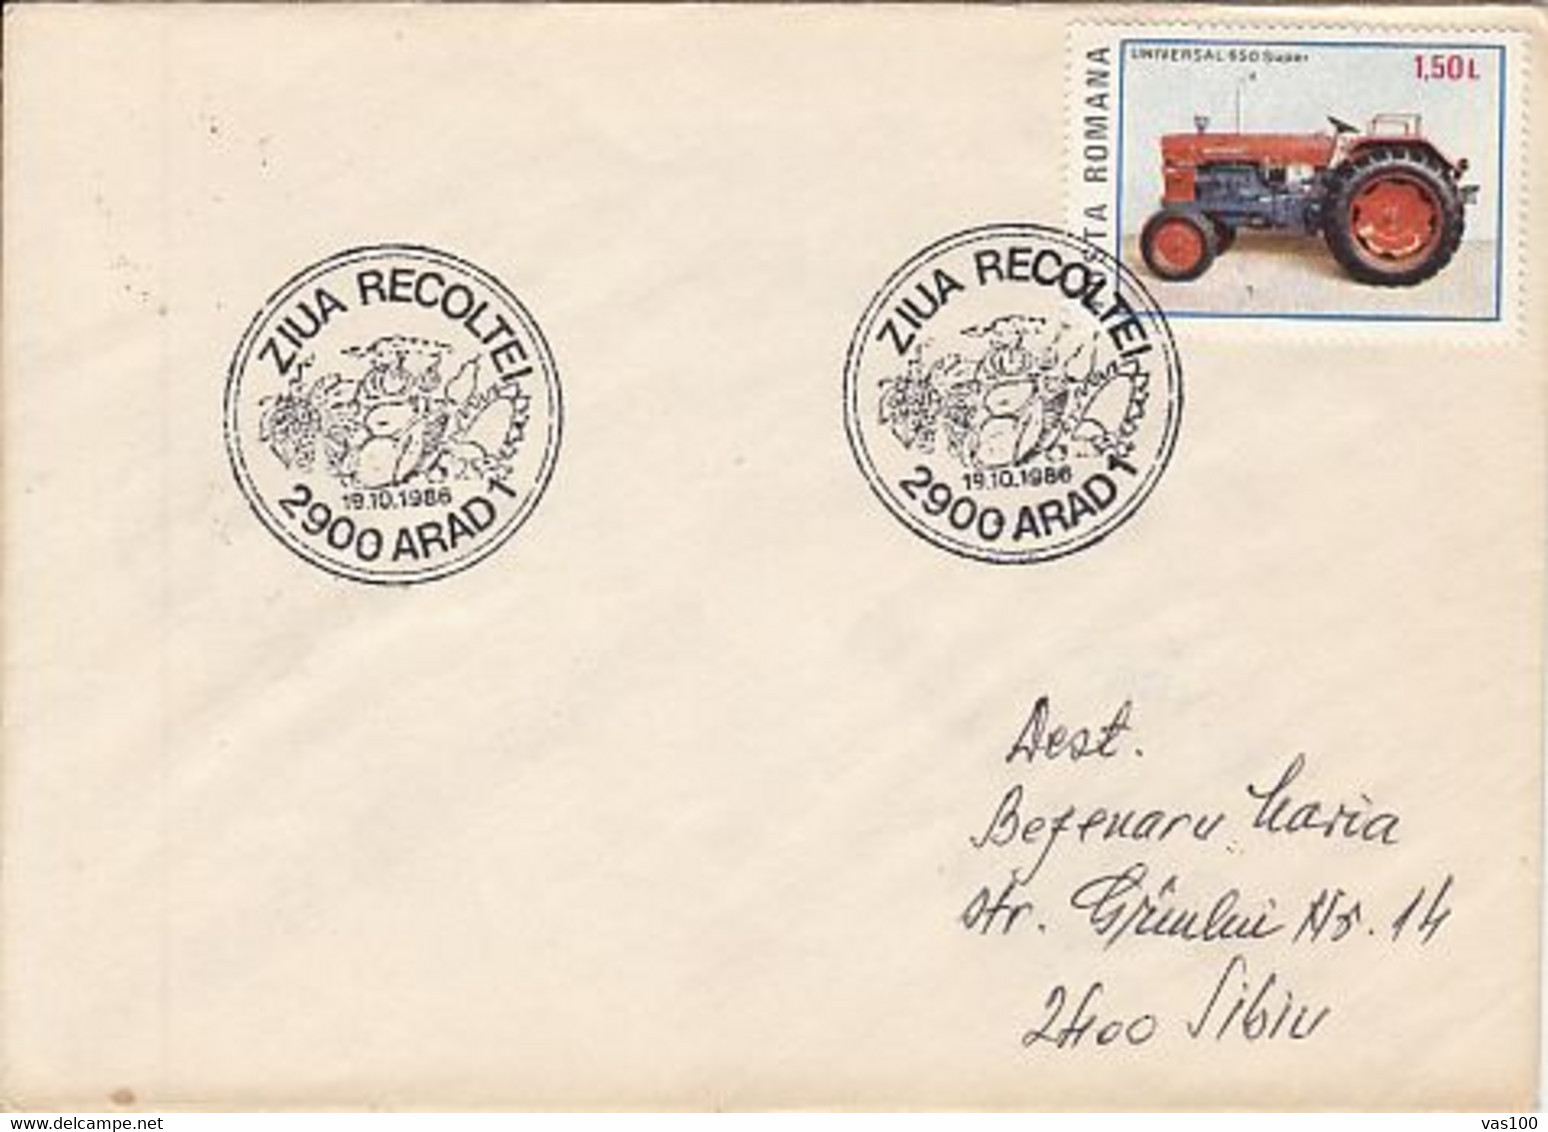 AGRICULTURE, HARVEST DAY SPECIAL POSTMARKS, TRACTOR STAMP ON COVER, 1986, ROMANIA - Agriculture